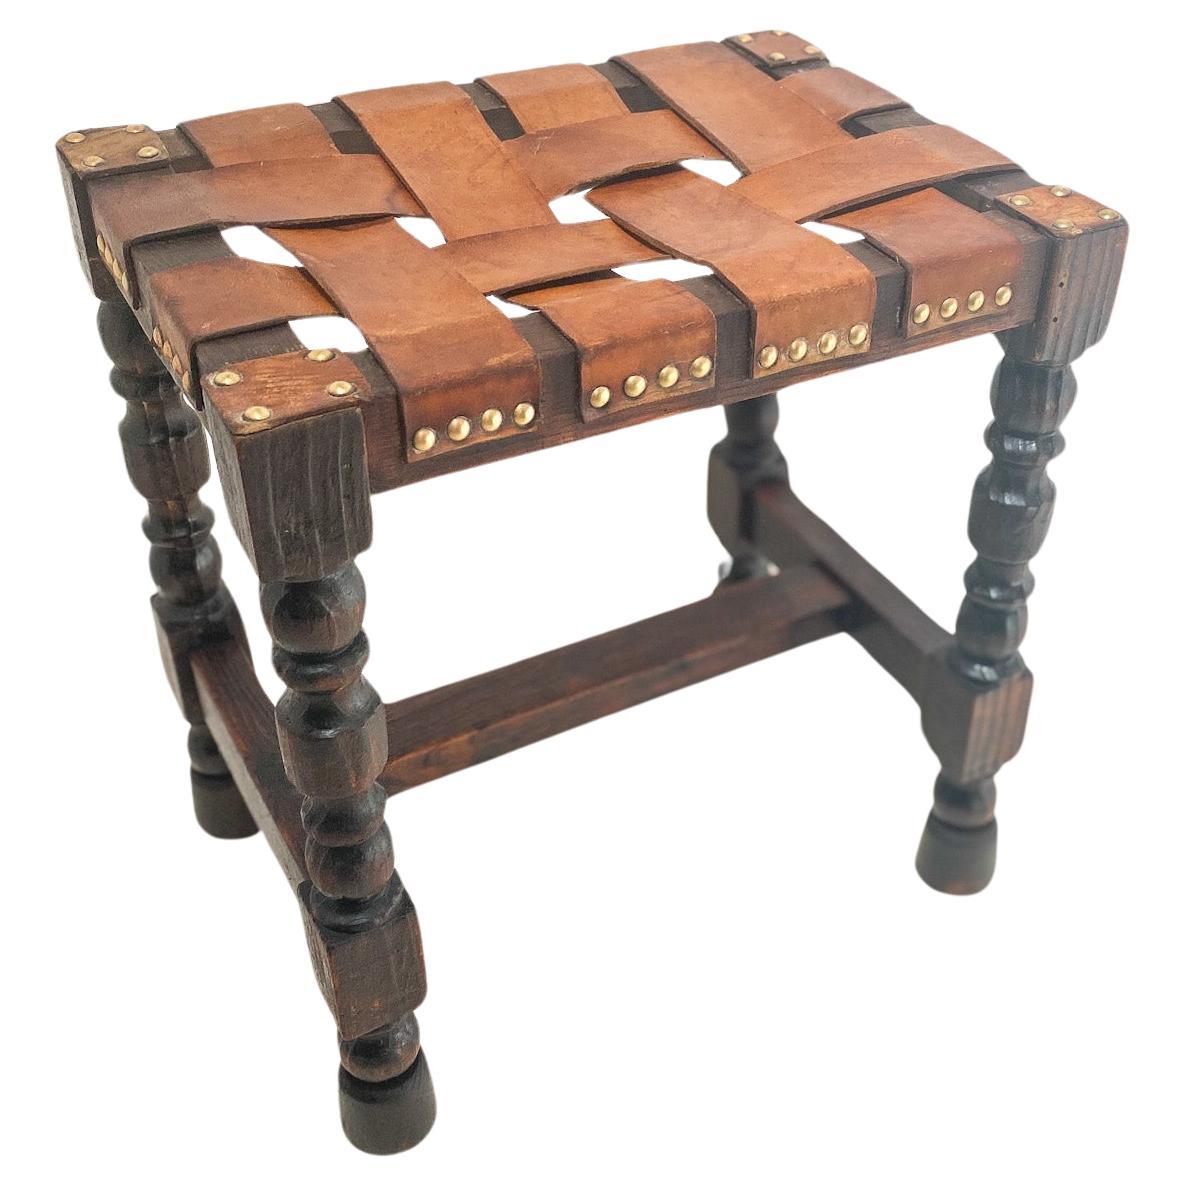 20th Century oak stool from England, the top is in a cross of Leather Straps . Legs are in a twisted carved shape. This is in a brown color.